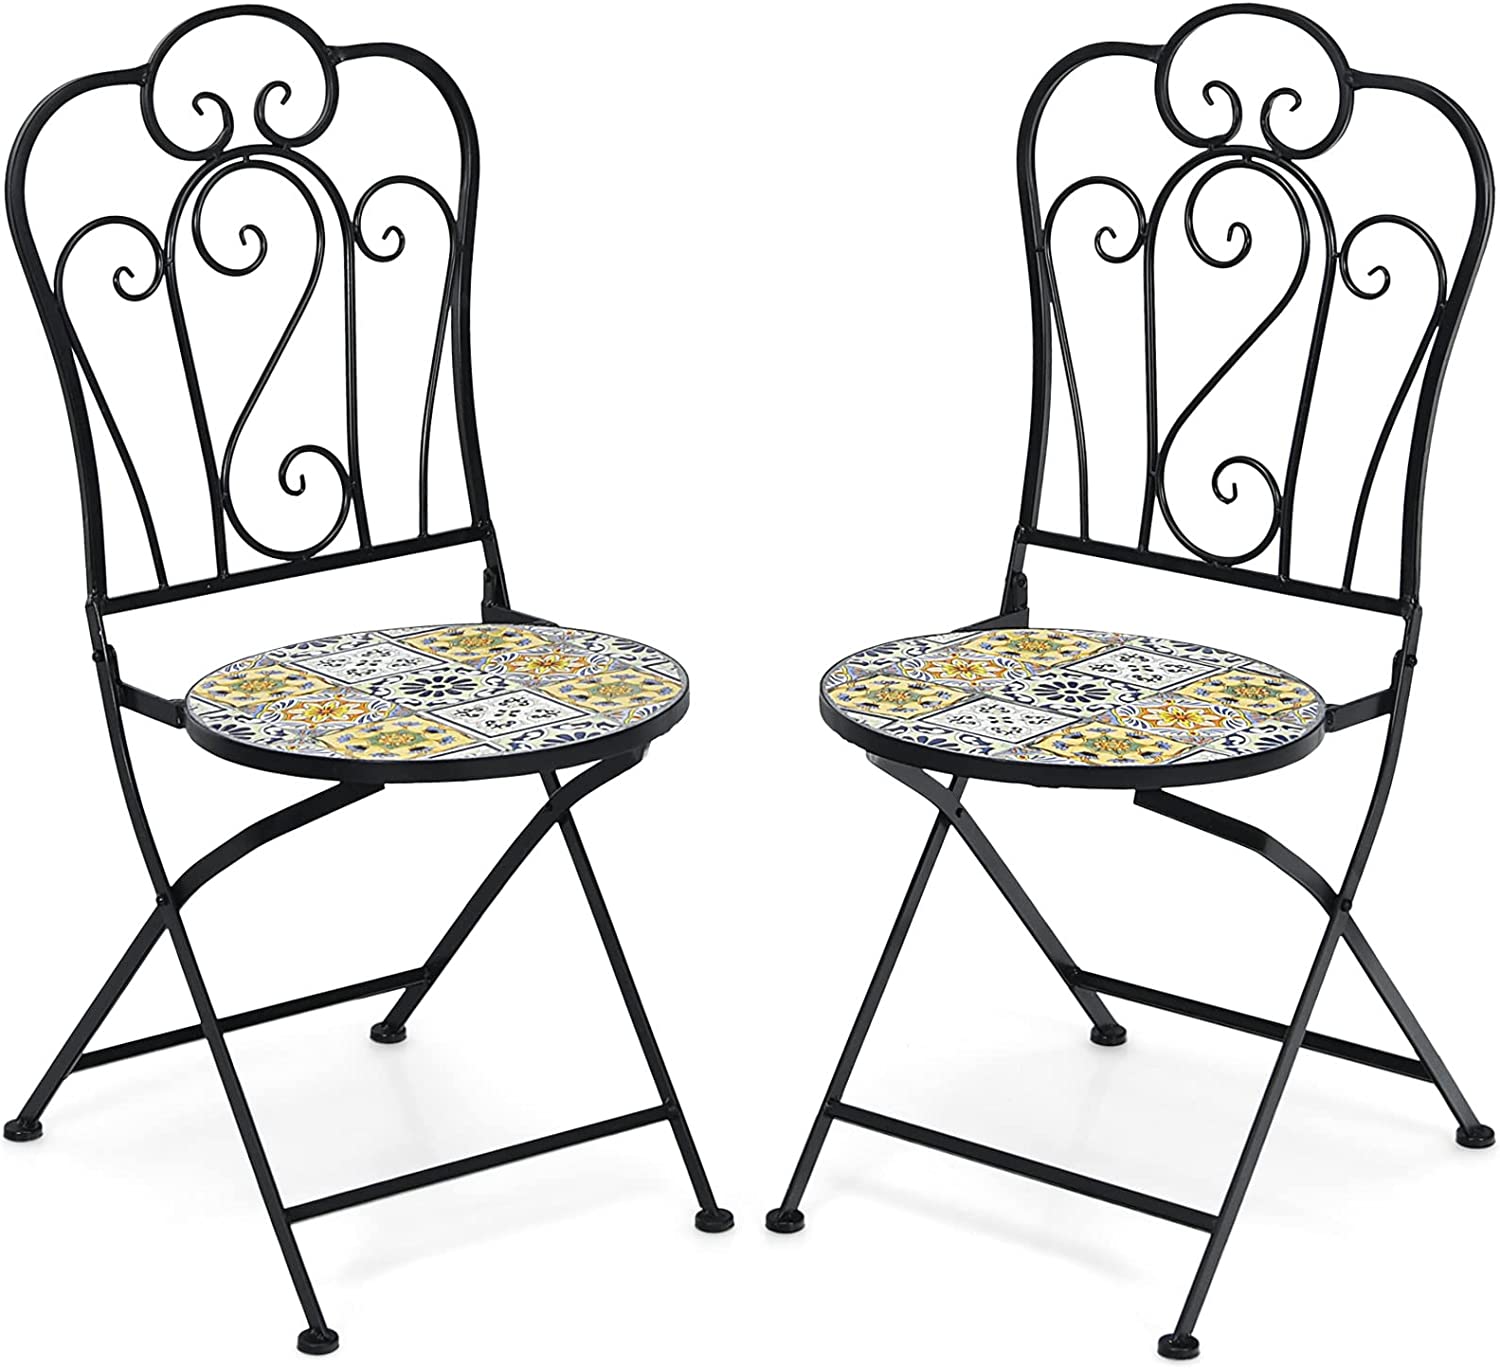 Giantex 2 Pieces Folding Bistro Chairs, Mosaic Patio Chairs with Ceramic Tiles Seat and Exquisite Floral Pattern